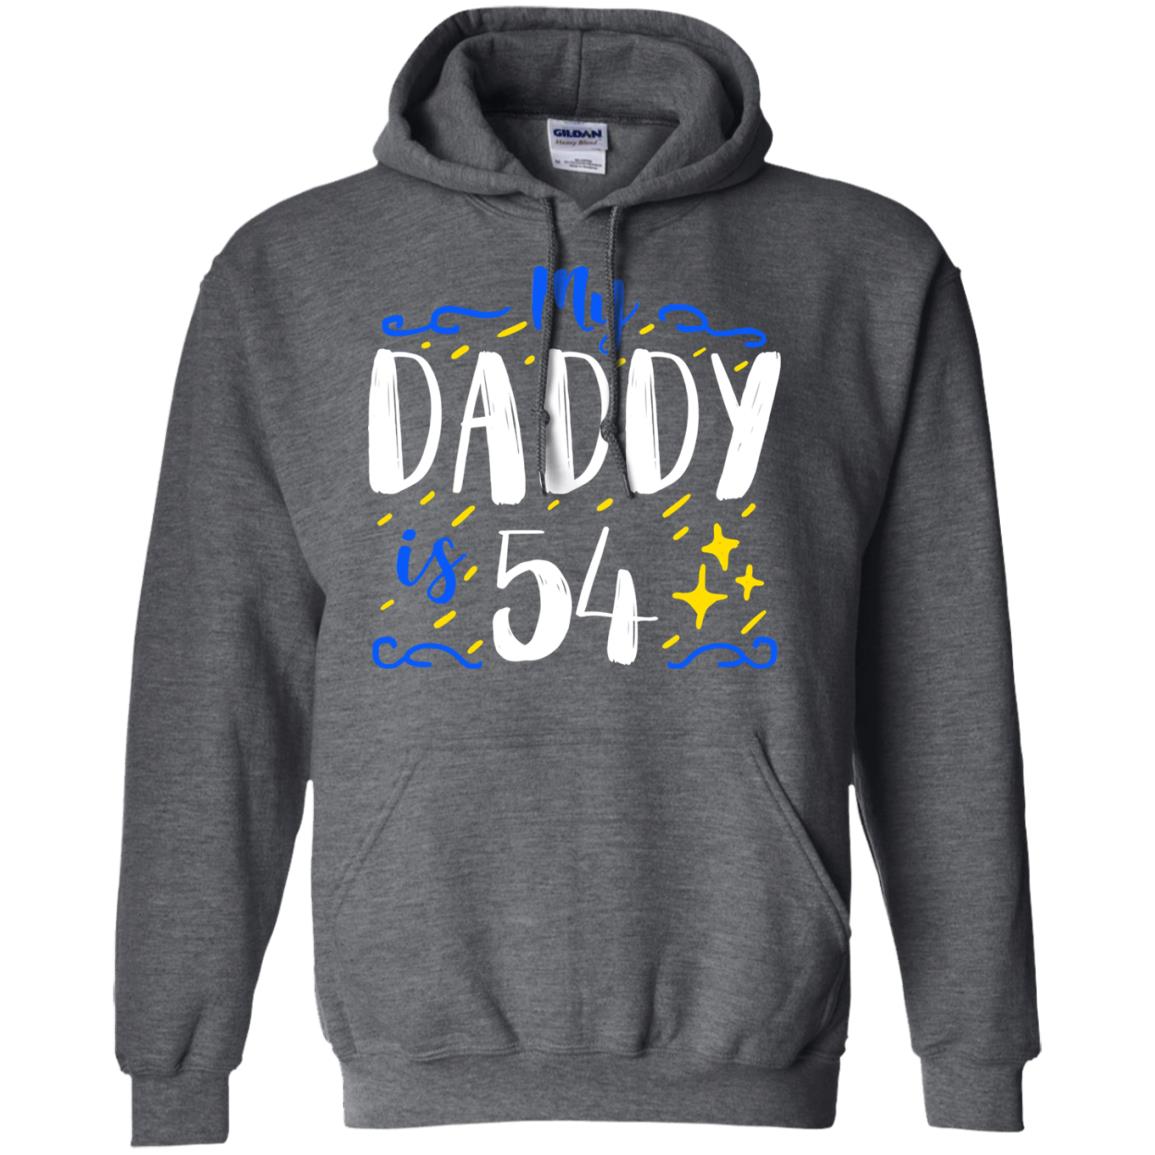 My Daddy Is 54 54th Birthday Daddy Shirt For Sons Or DaughtersG185 Gildan Pullover Hoodie 8 oz.